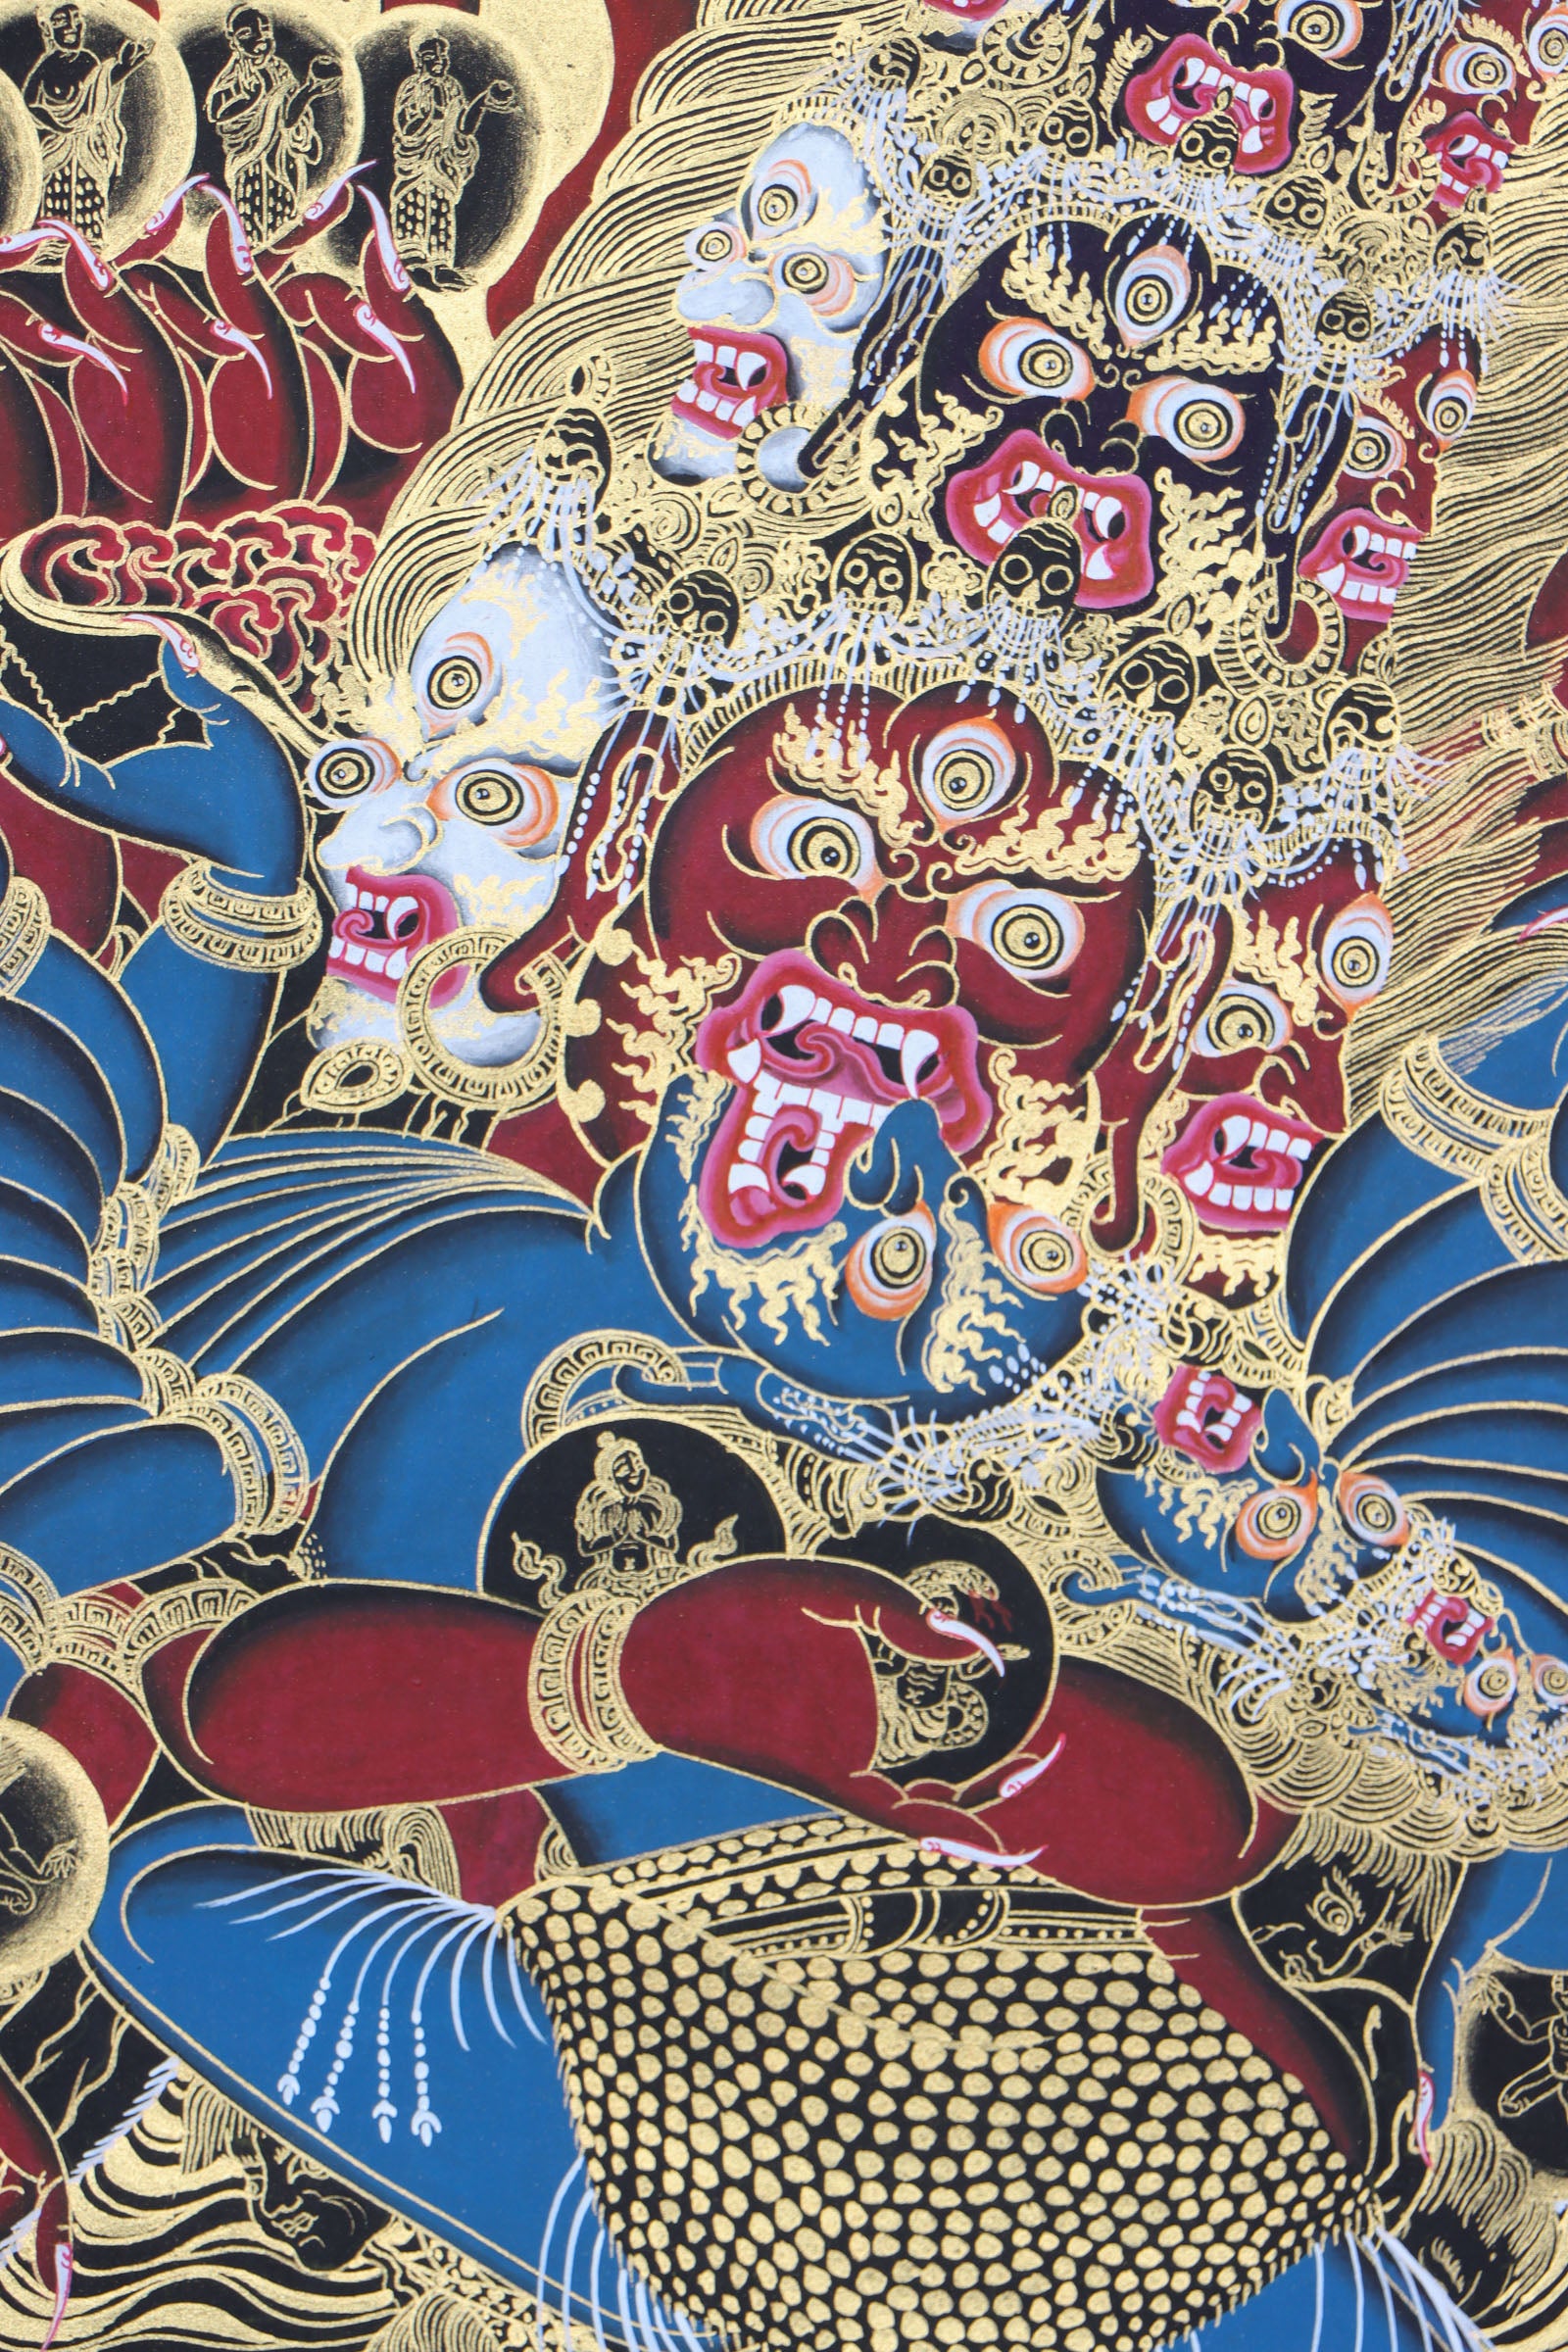 Heruka Thangka Painting aids for meditation and objects of devotion.